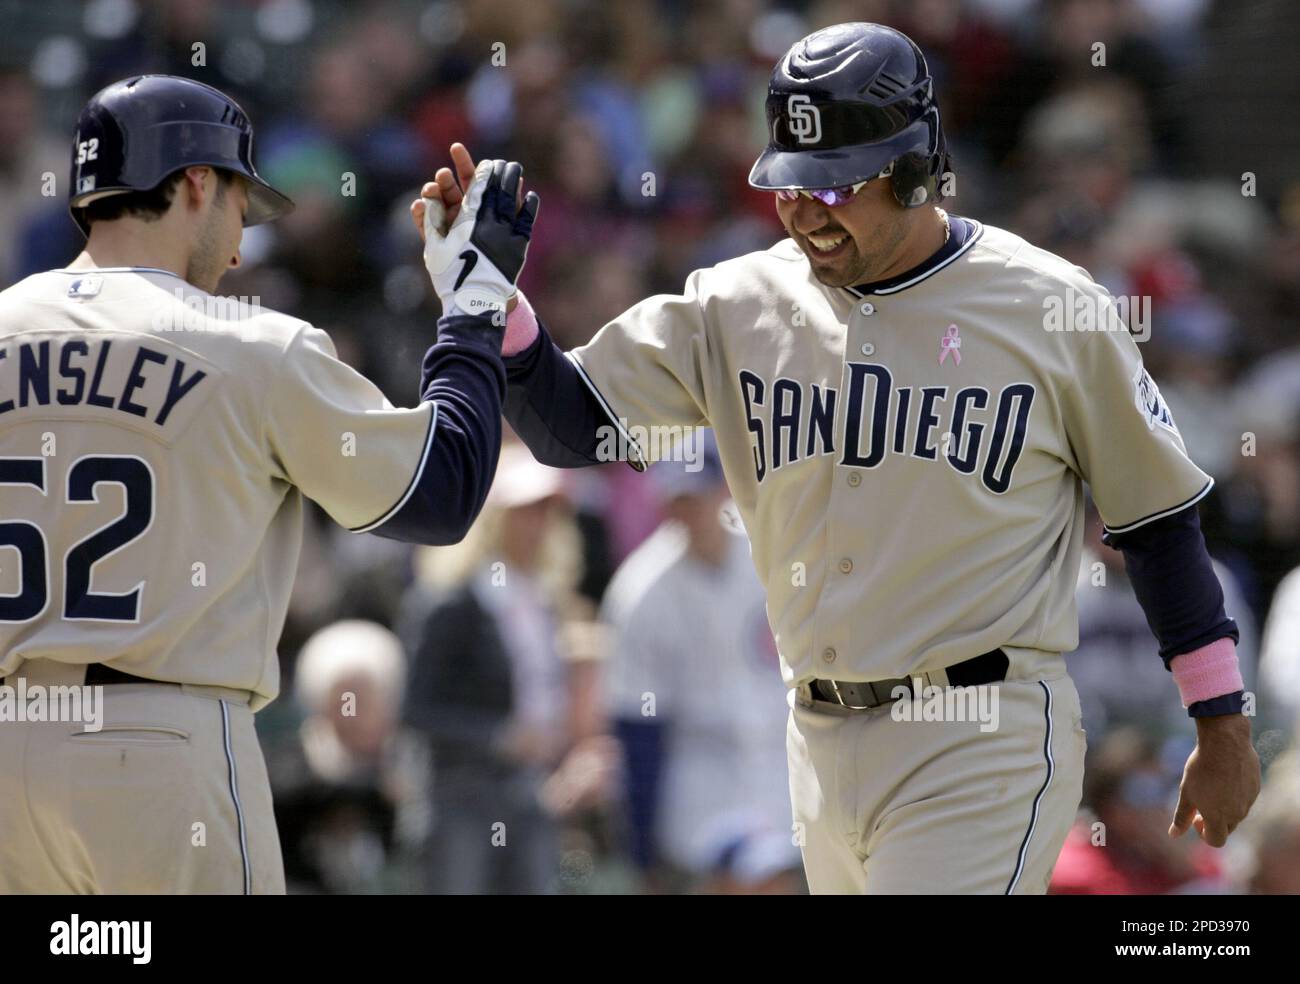 San Diego Padres' Vinny Castilla, right, smiles as he is congratulated by  teammate Clay Hensley after scoring on a wild pitch by Chicago Cubs pitcher  Scott Williamson during the sixth inning of